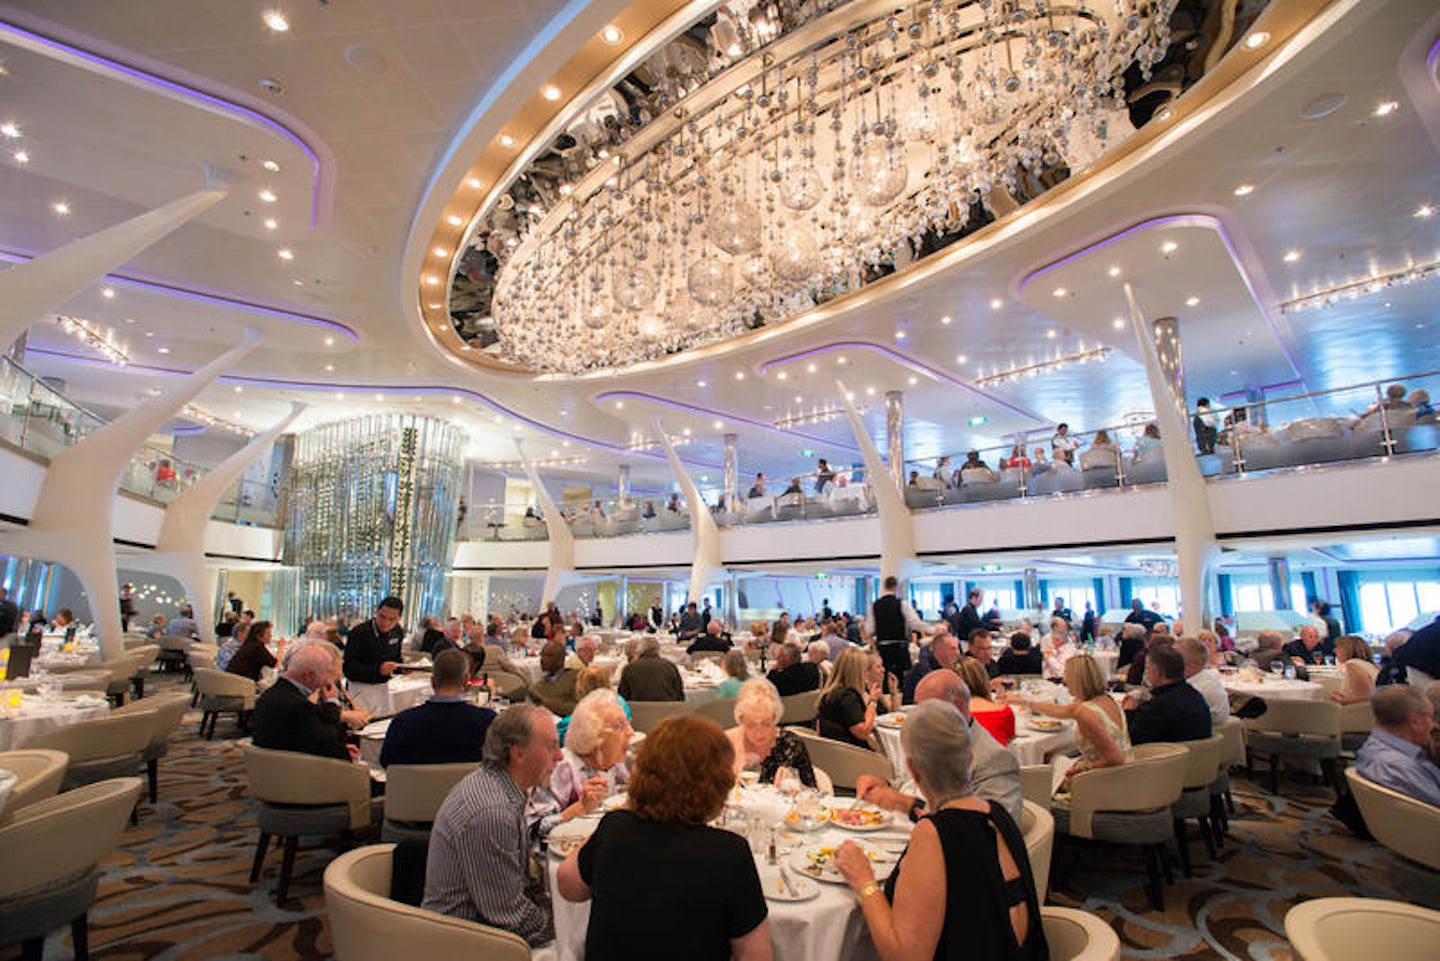 The Moonlight Sonata Dining Room on Celebrity Eclipse